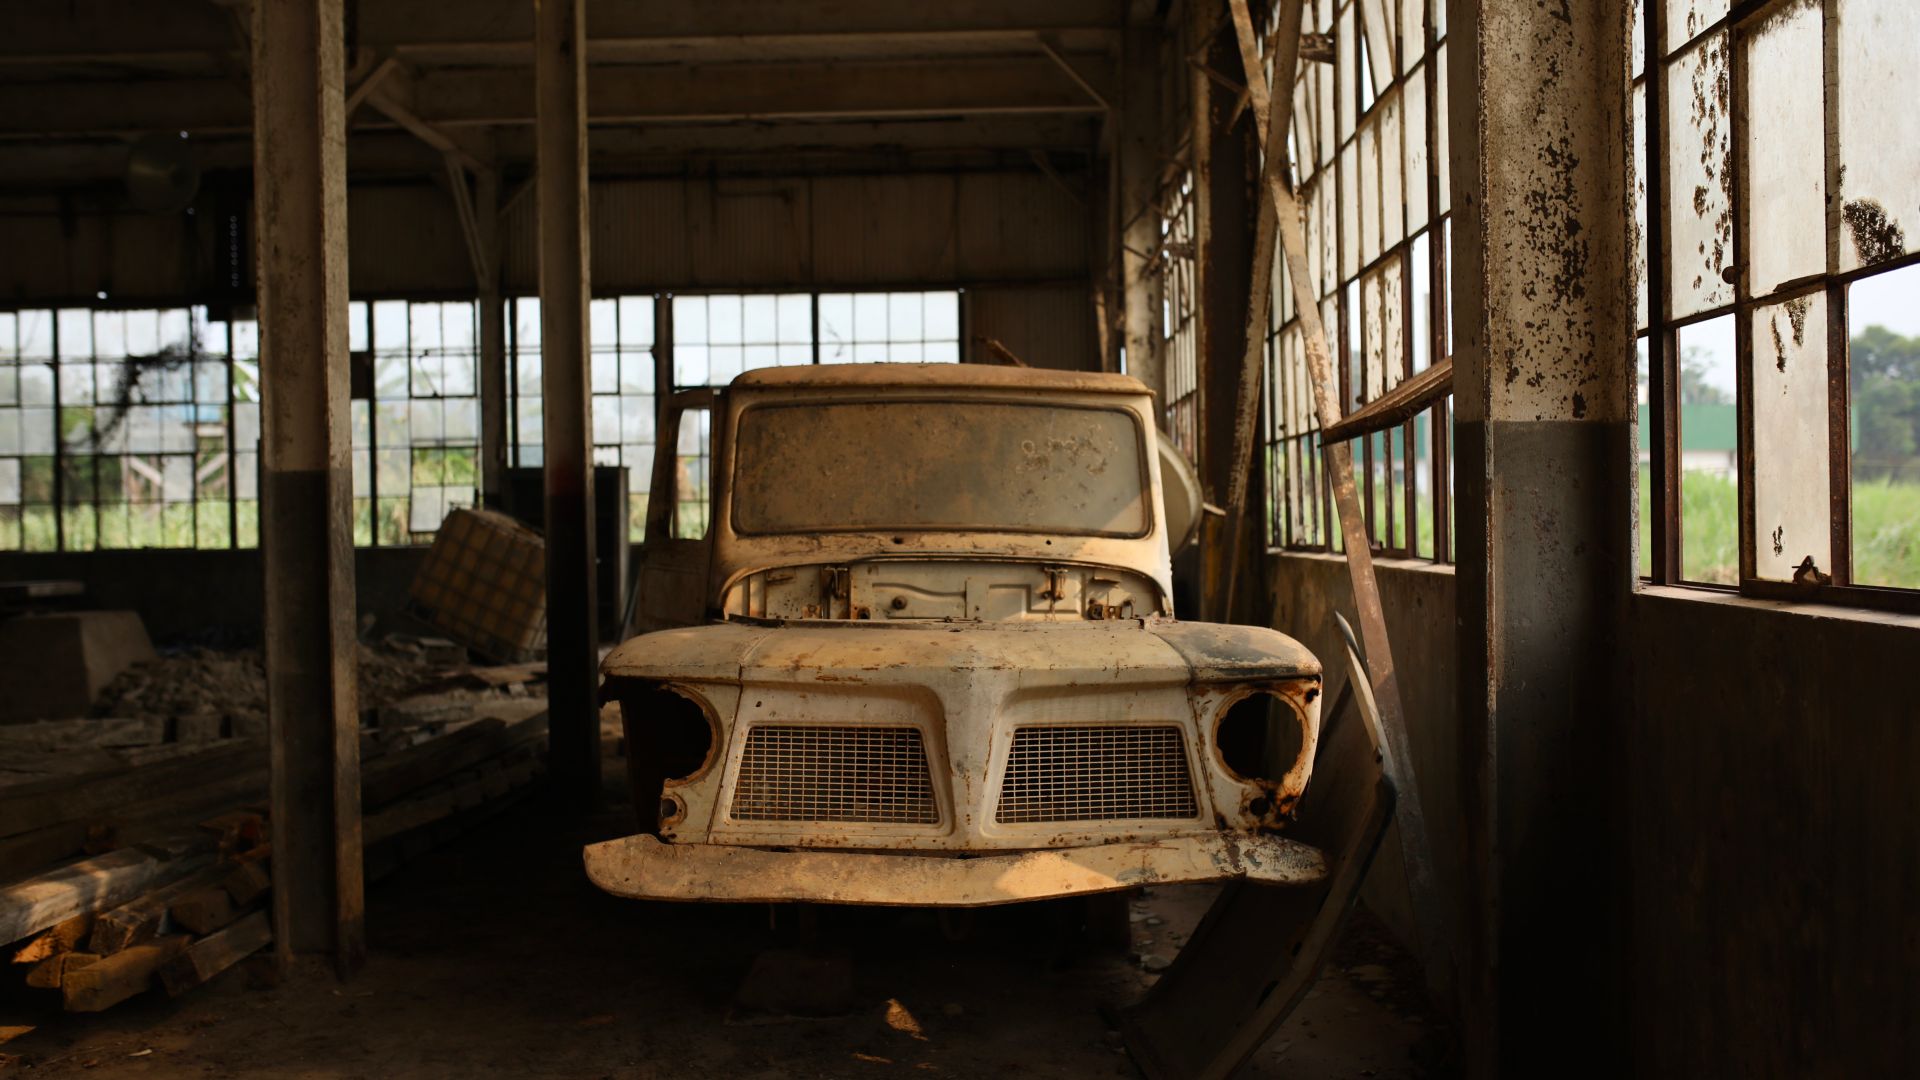 A rusted, antique truck sits in an abandoned warehouse.